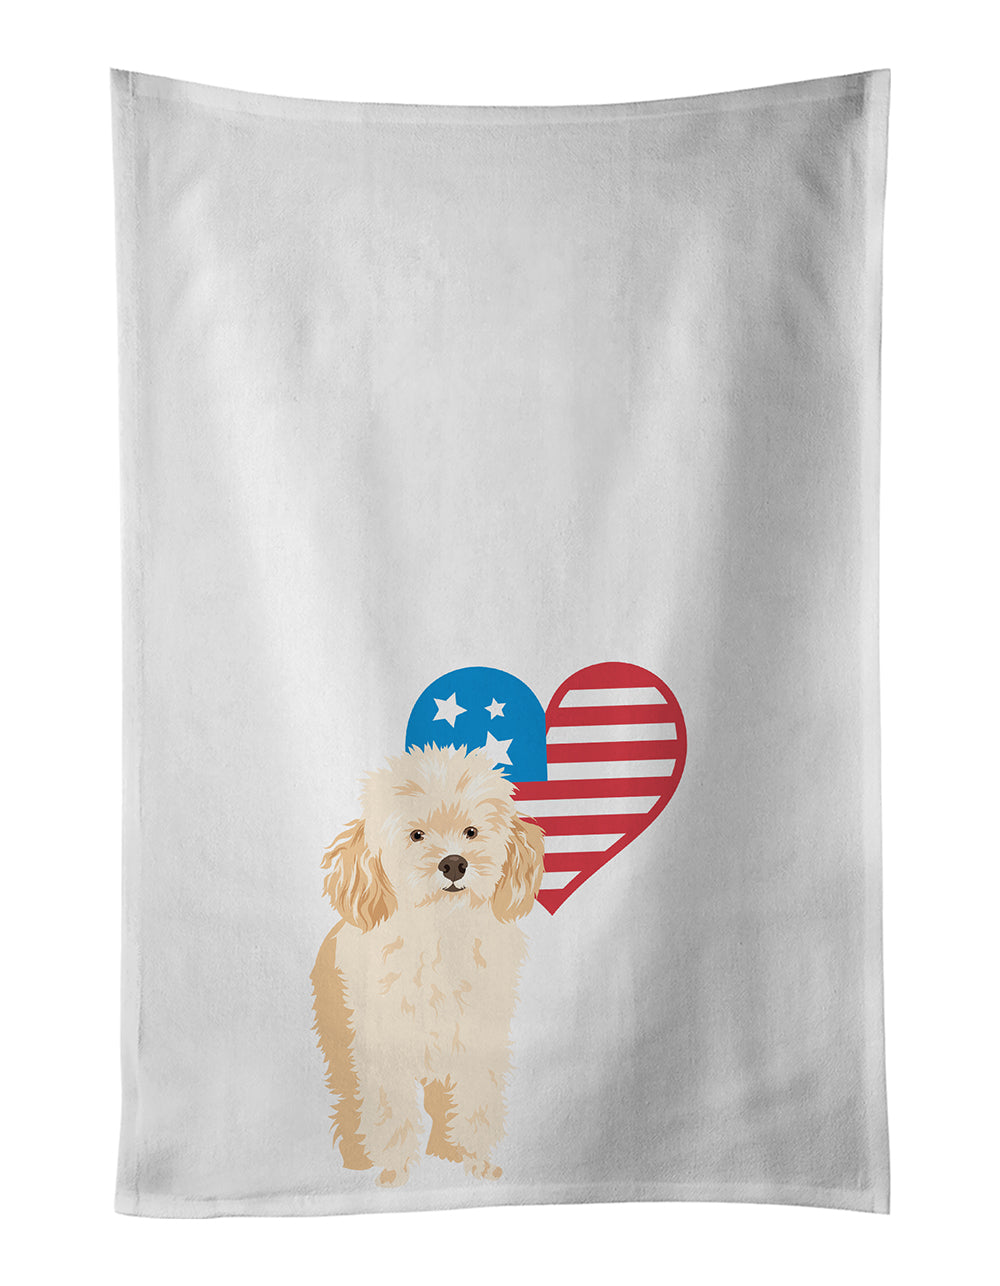 Buy this Poodle Toy Apricot #2 Patriotic White Kitchen Towel Set of 2